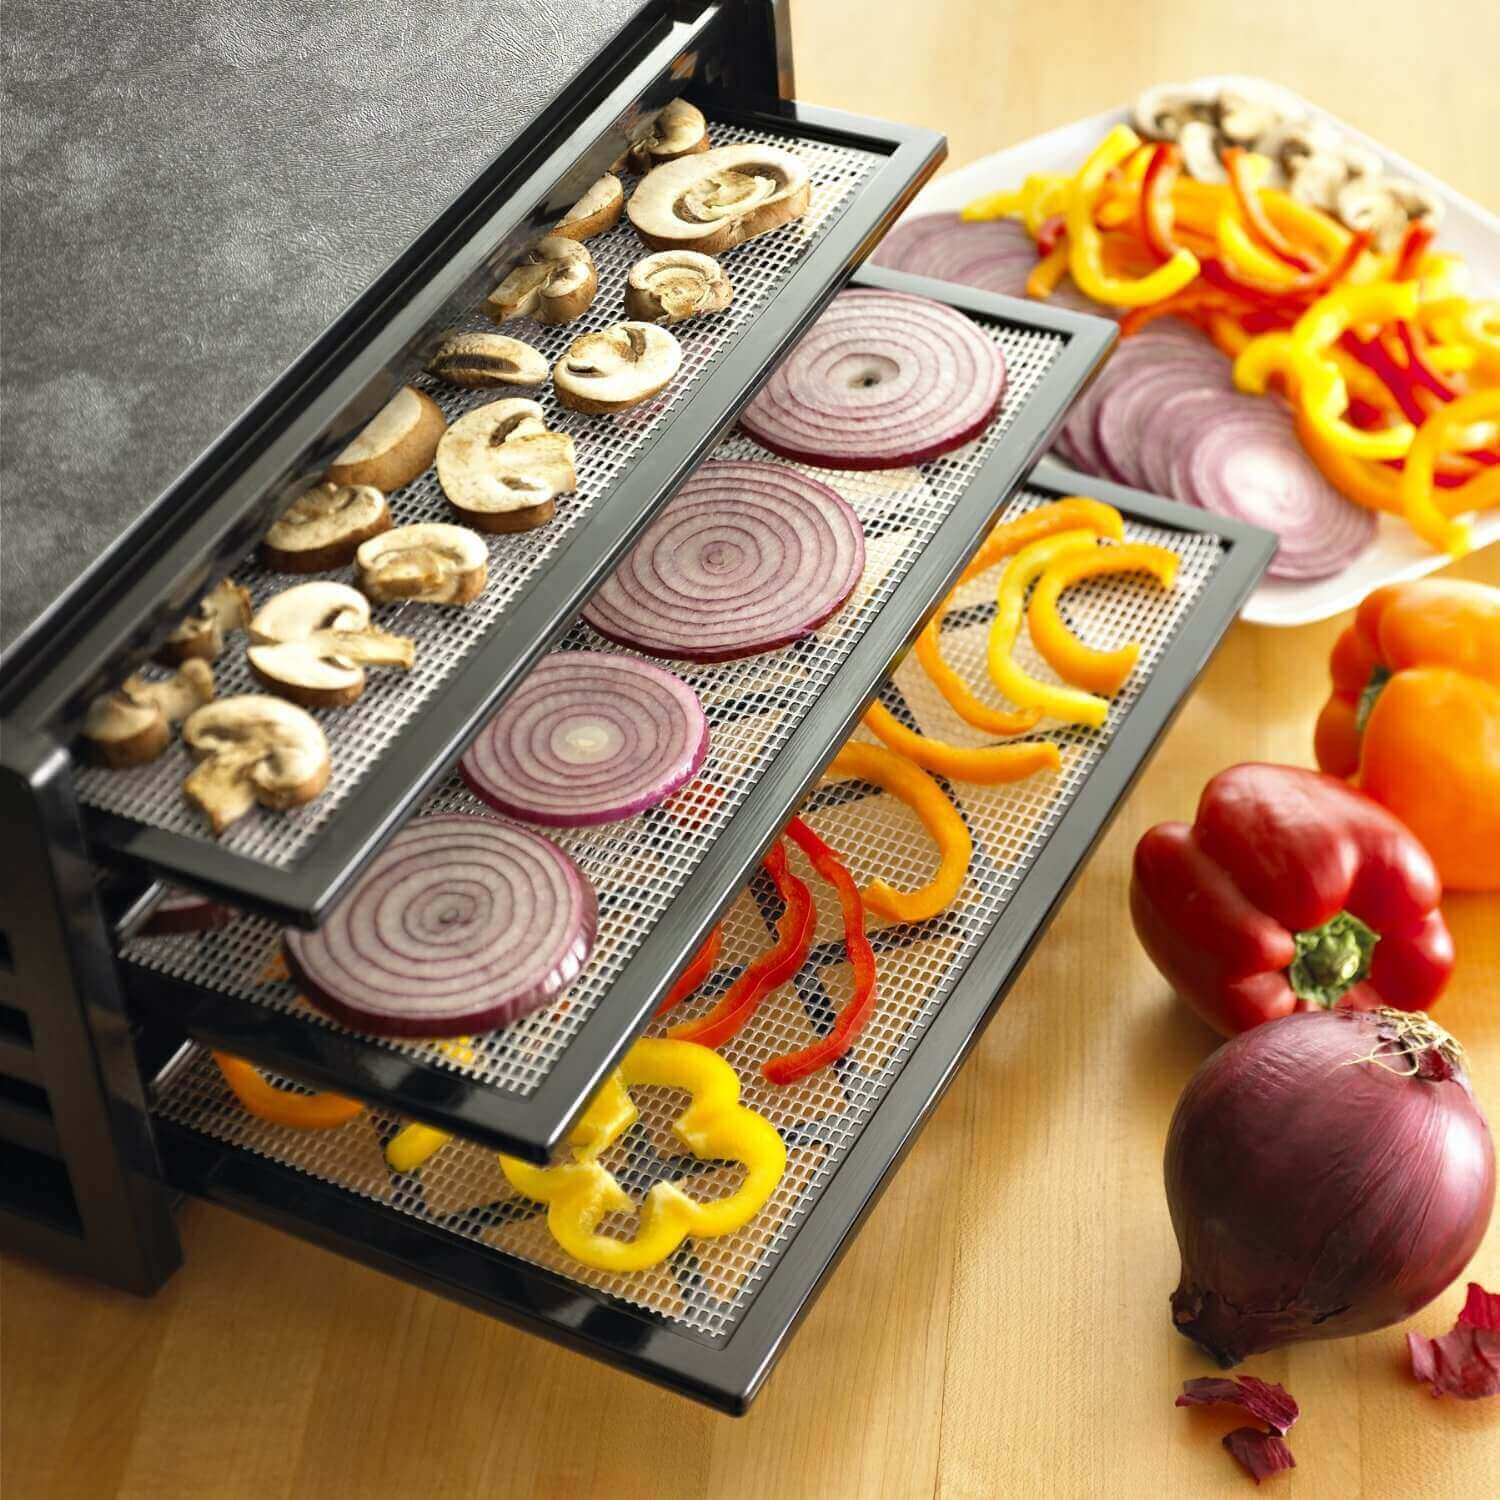 Excalibur 4400 4 tray dehydrator with an assortment of vegetables placed on the trays.